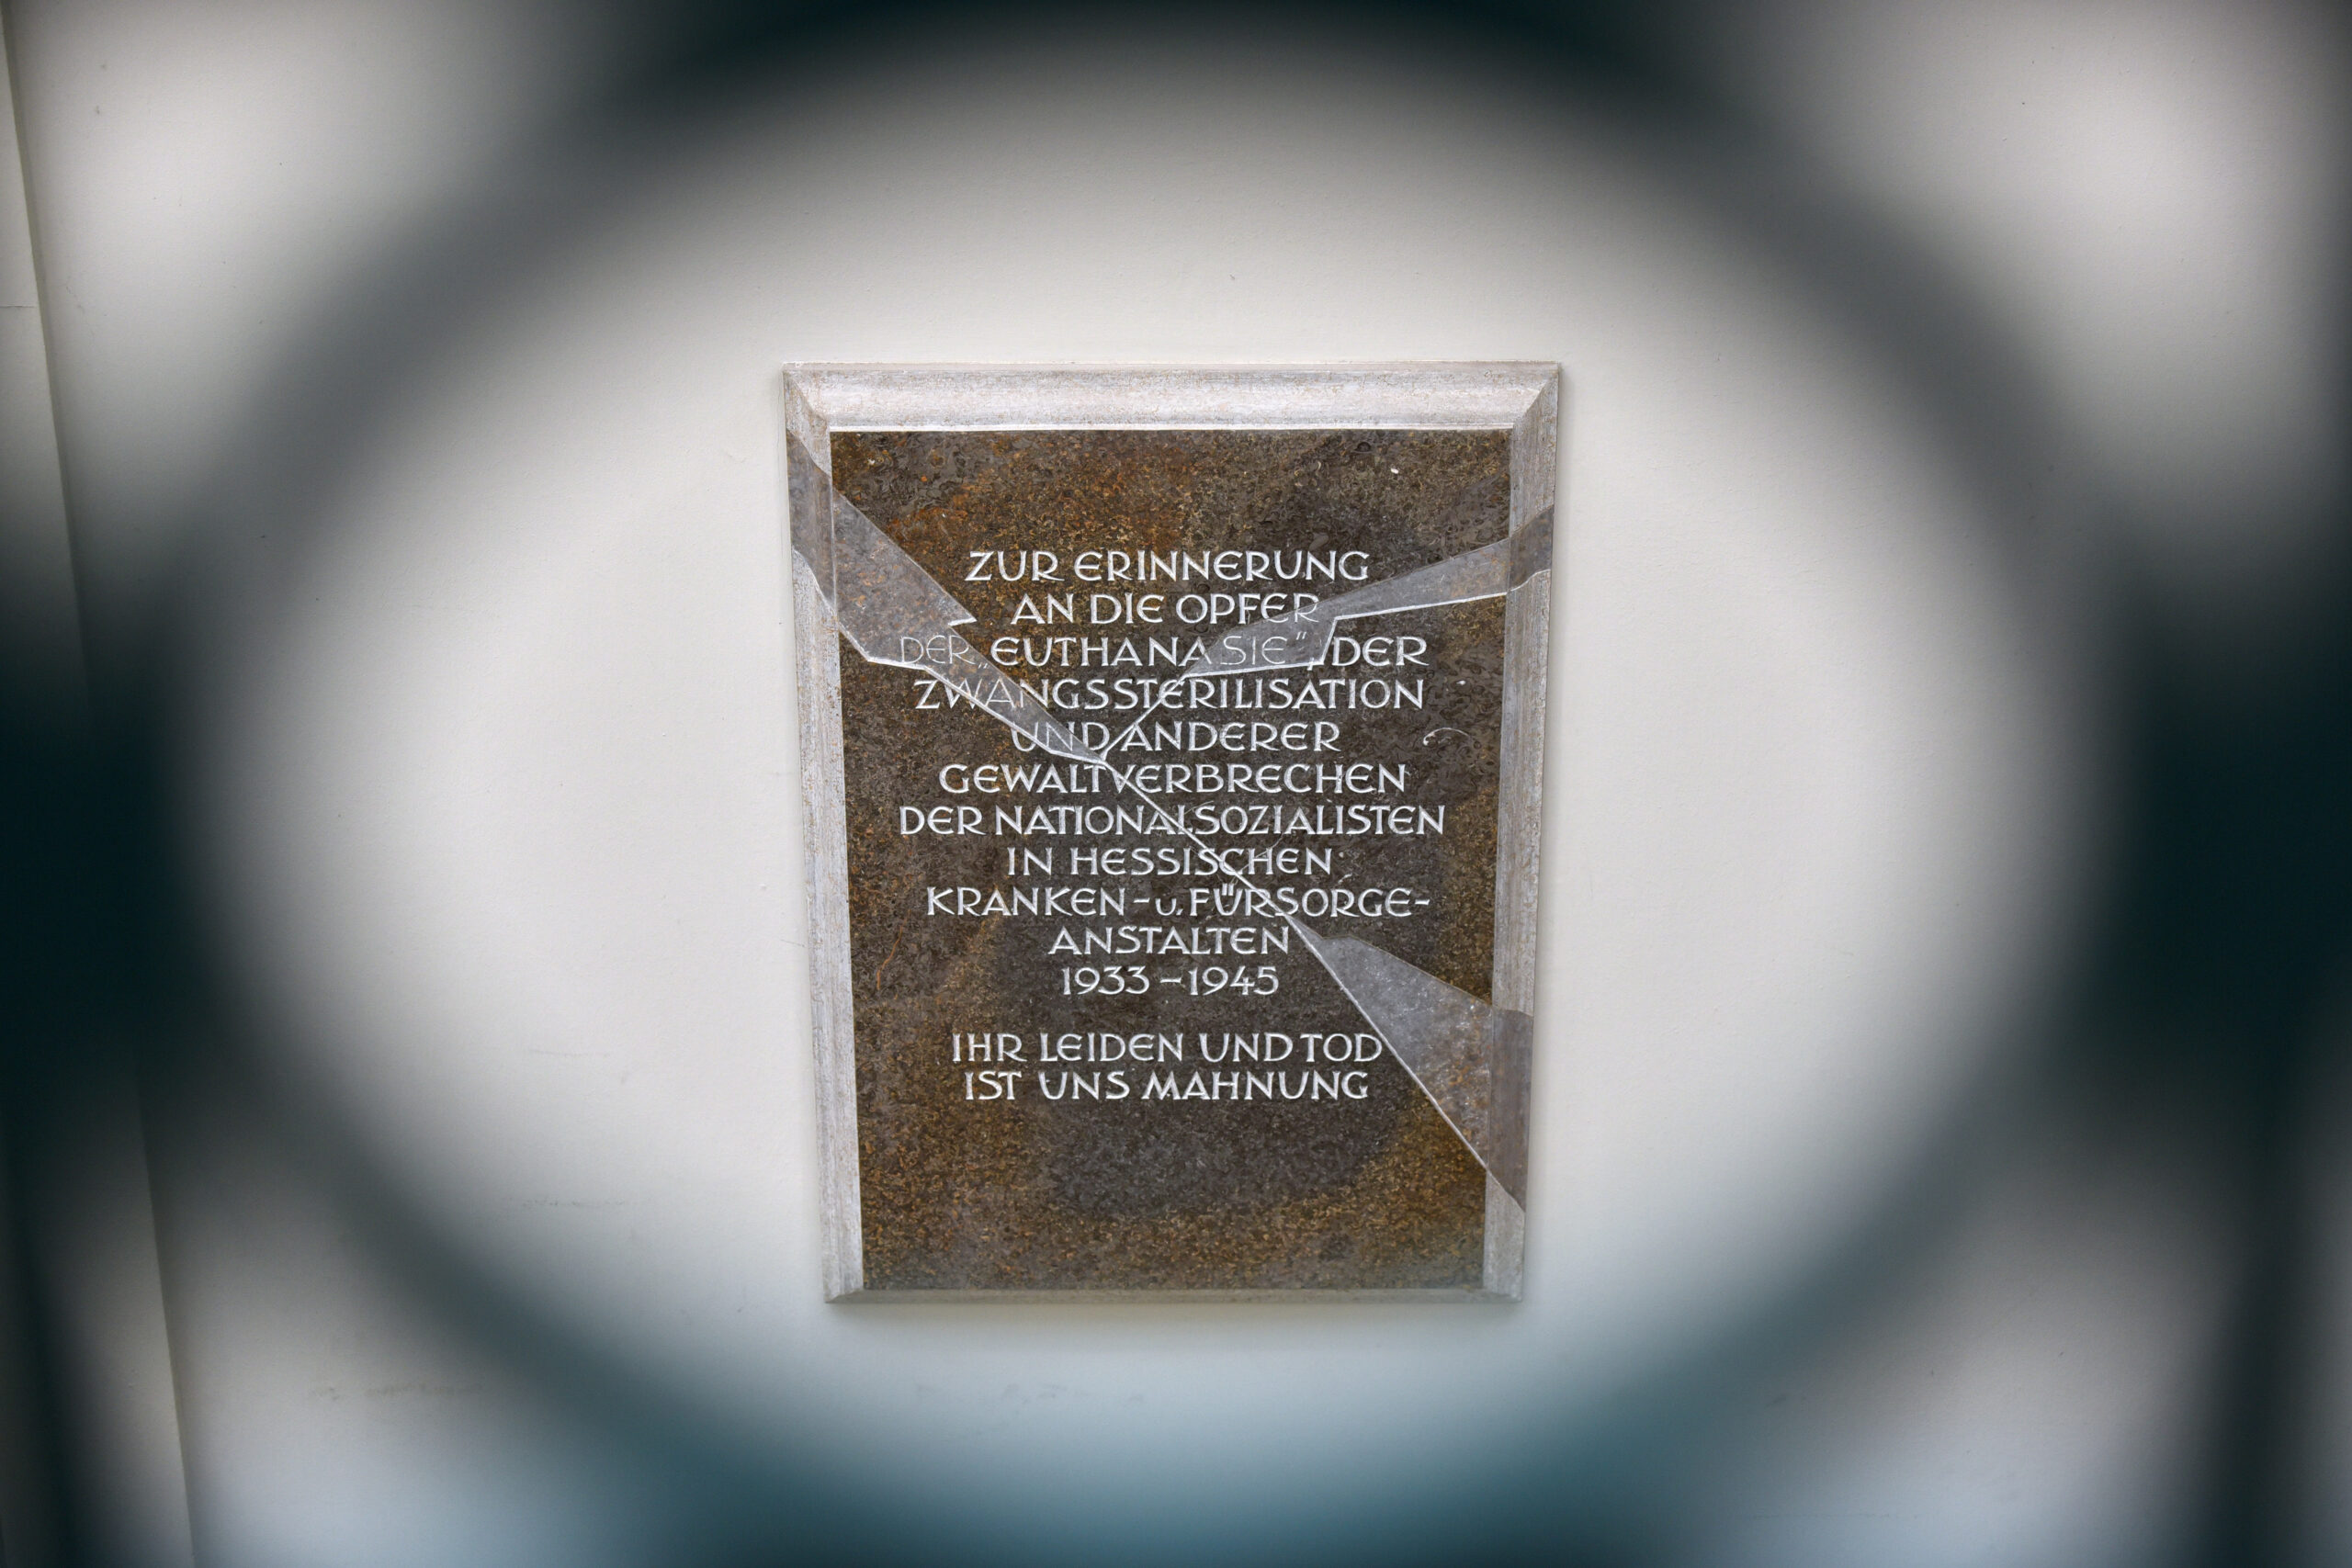 Colour photograph of a brown plaque embedded in a wall. The effect that is created is as if the plaque were made of glass and has a large crack running through it. Translated, the inscription reads "In remembrance of the victims of "euthanasia", forced sterilization and other violent crimes committed by the Nazis in Hessian hospital and care facilities from 1933-1945. Their suffering and death is a warning to us all."